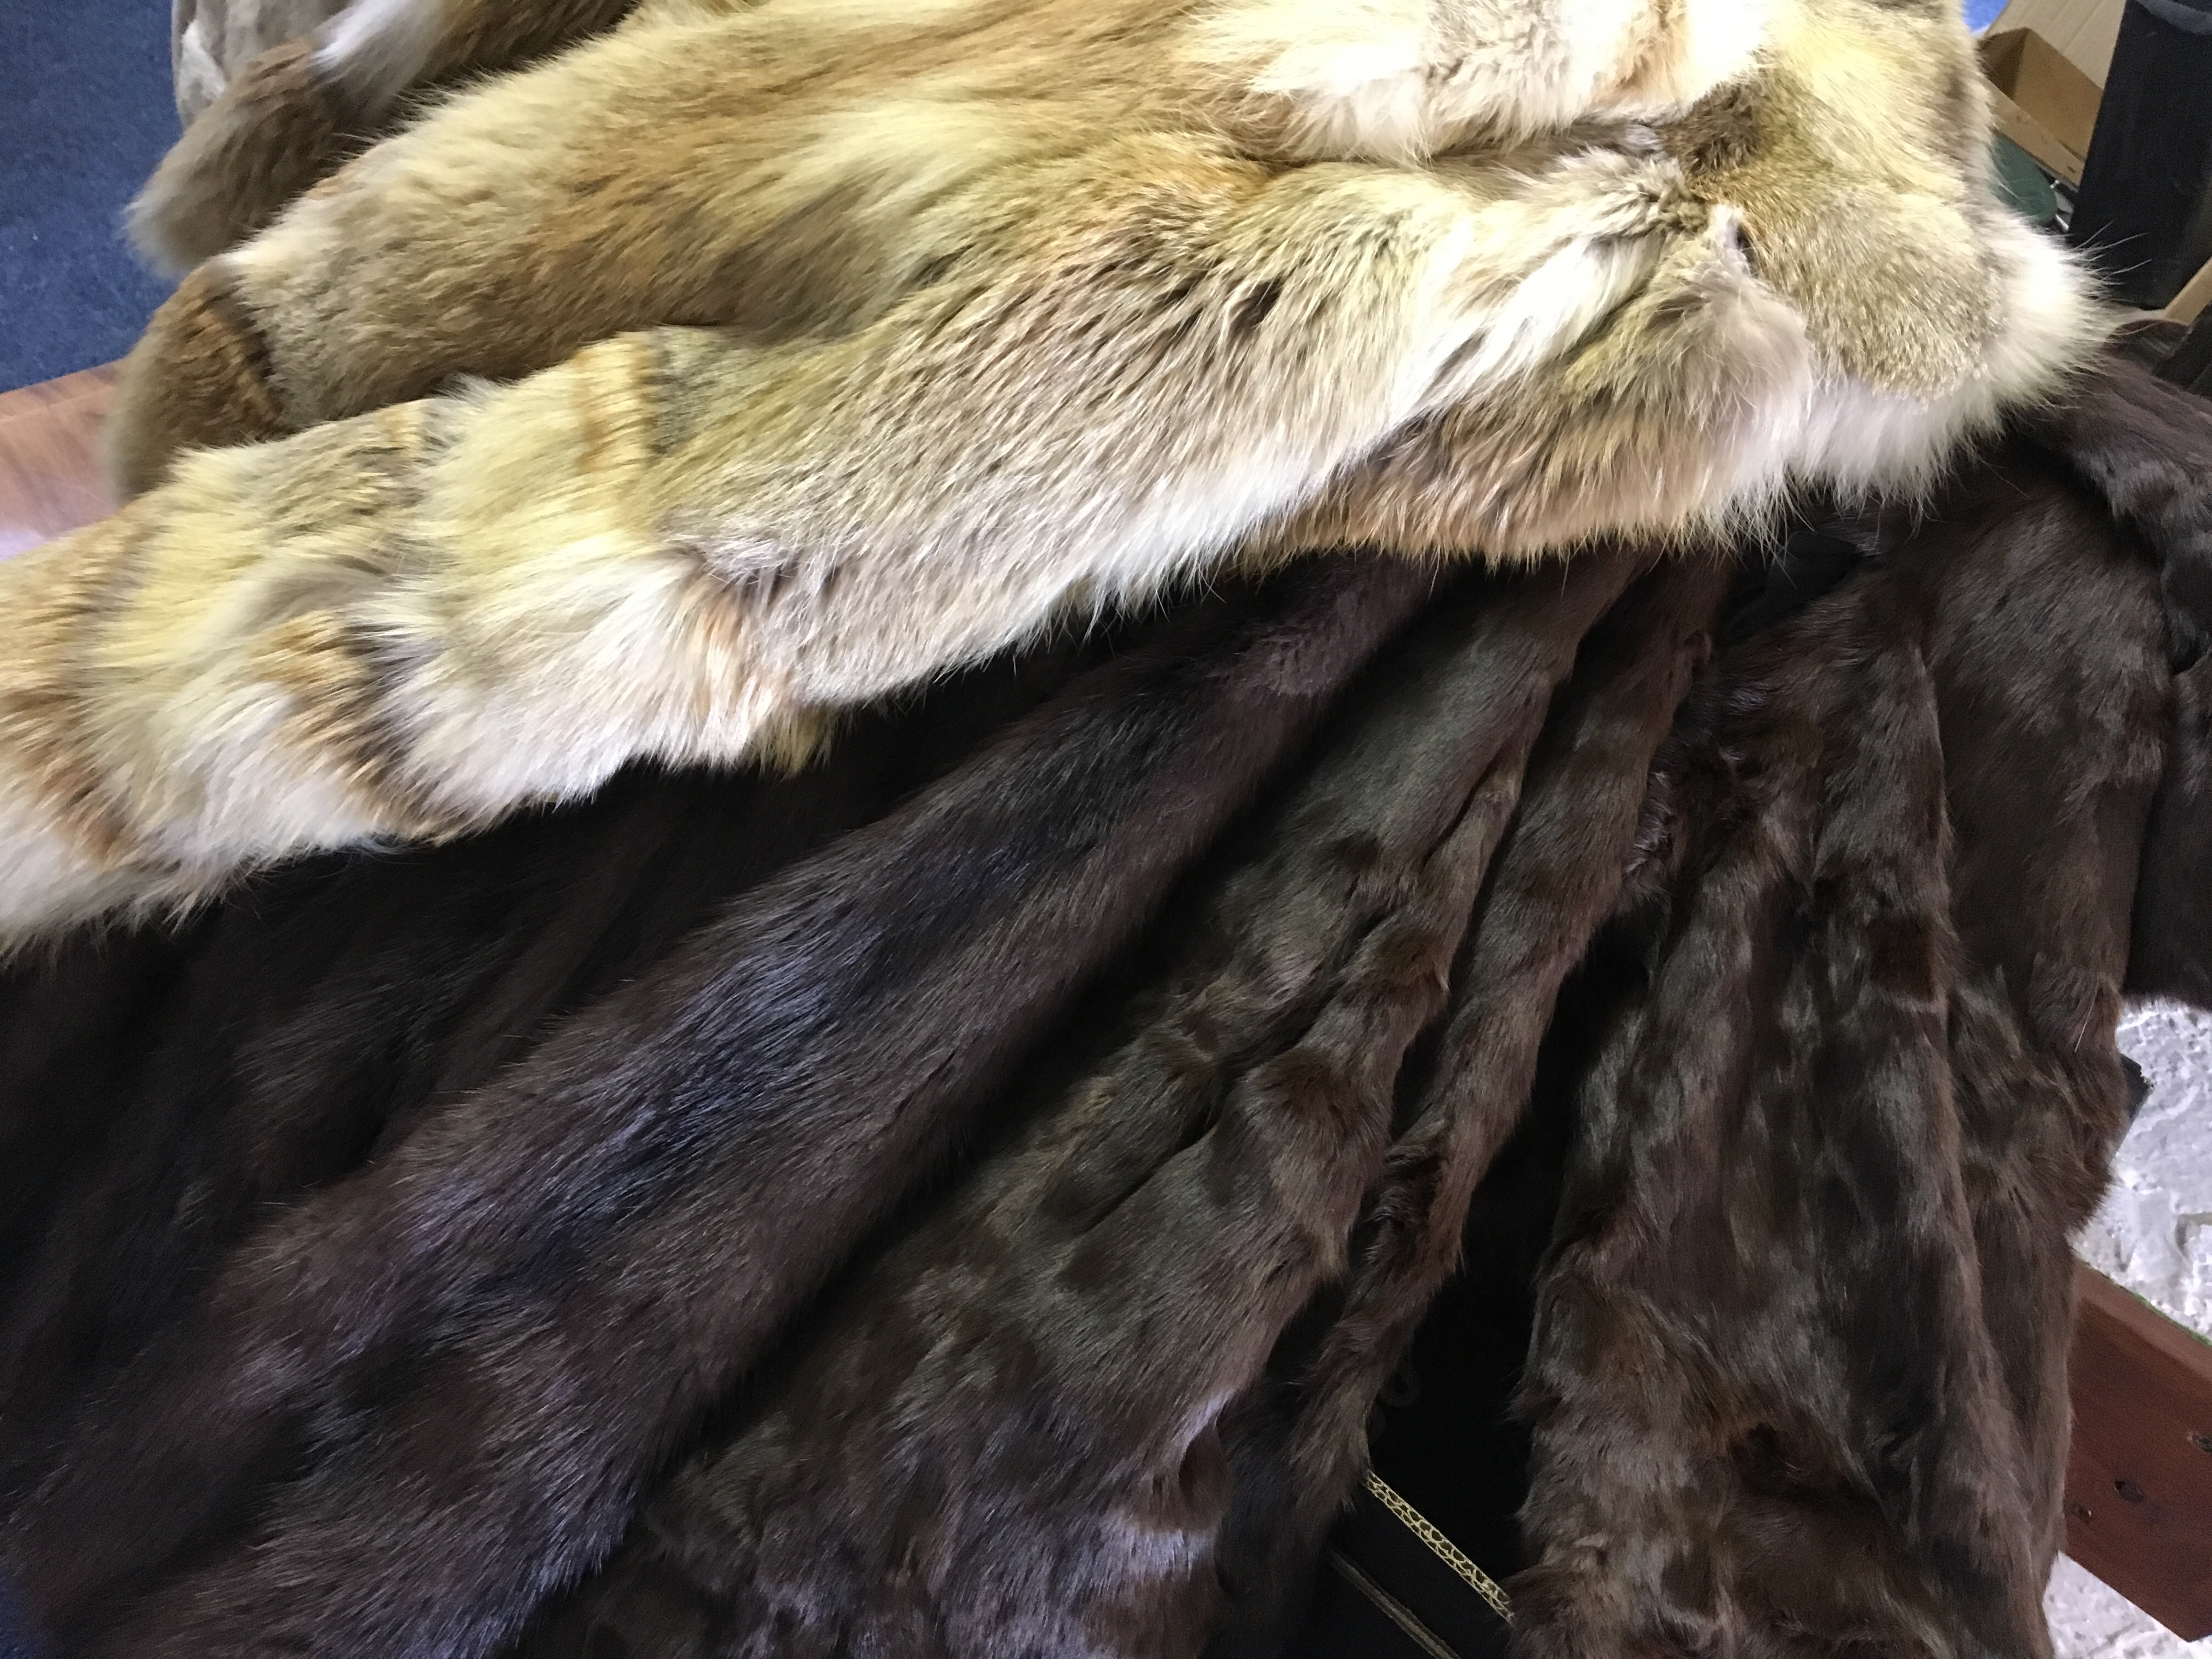 Two full length fur coats and two fur jackets.